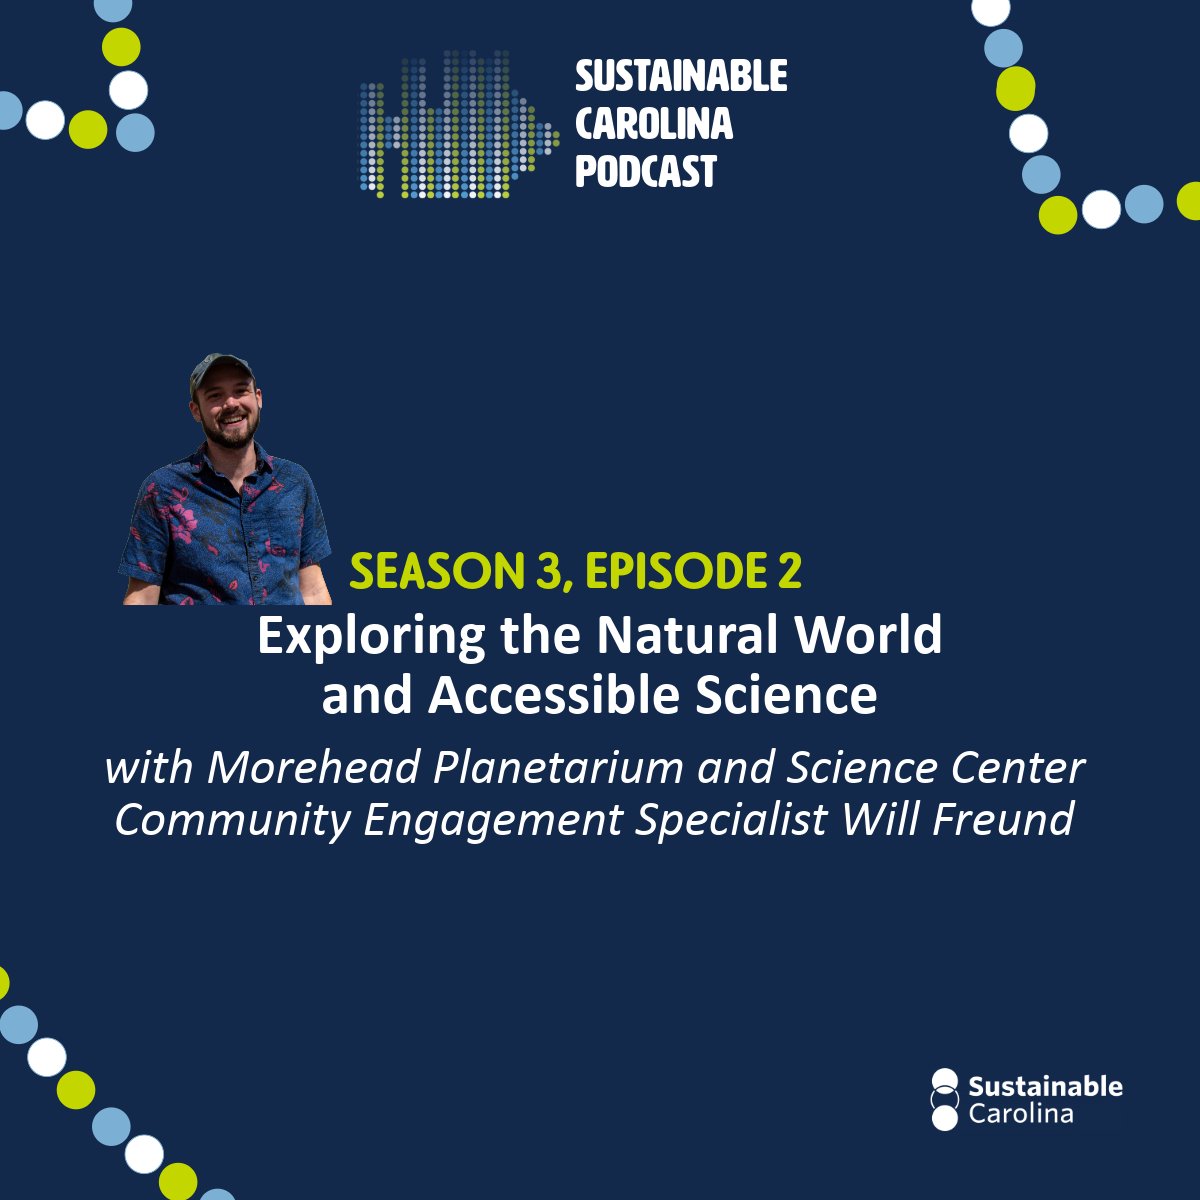 Meet one of the many people who make the #UNCScienceExpo happen every year! We spoke with @moreheadplanet Community Engagement Specialist @FourthFreund on our latest podcast episode. Listen here: open.spotify.com/episode/1SzHGs…